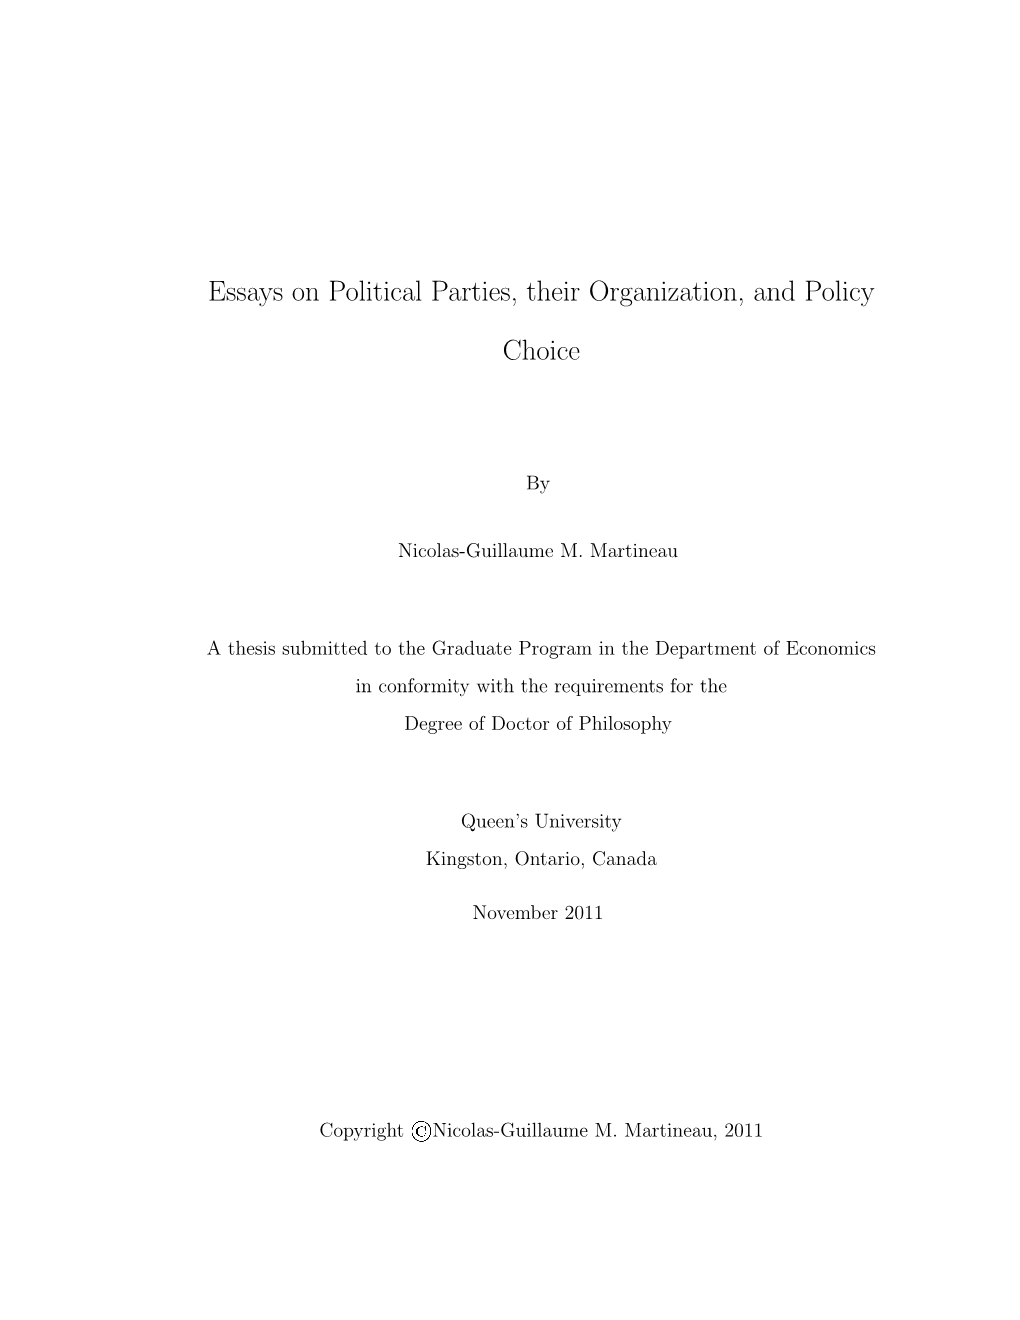 Essays on Political Parties, Their Organization, and Policy Choice